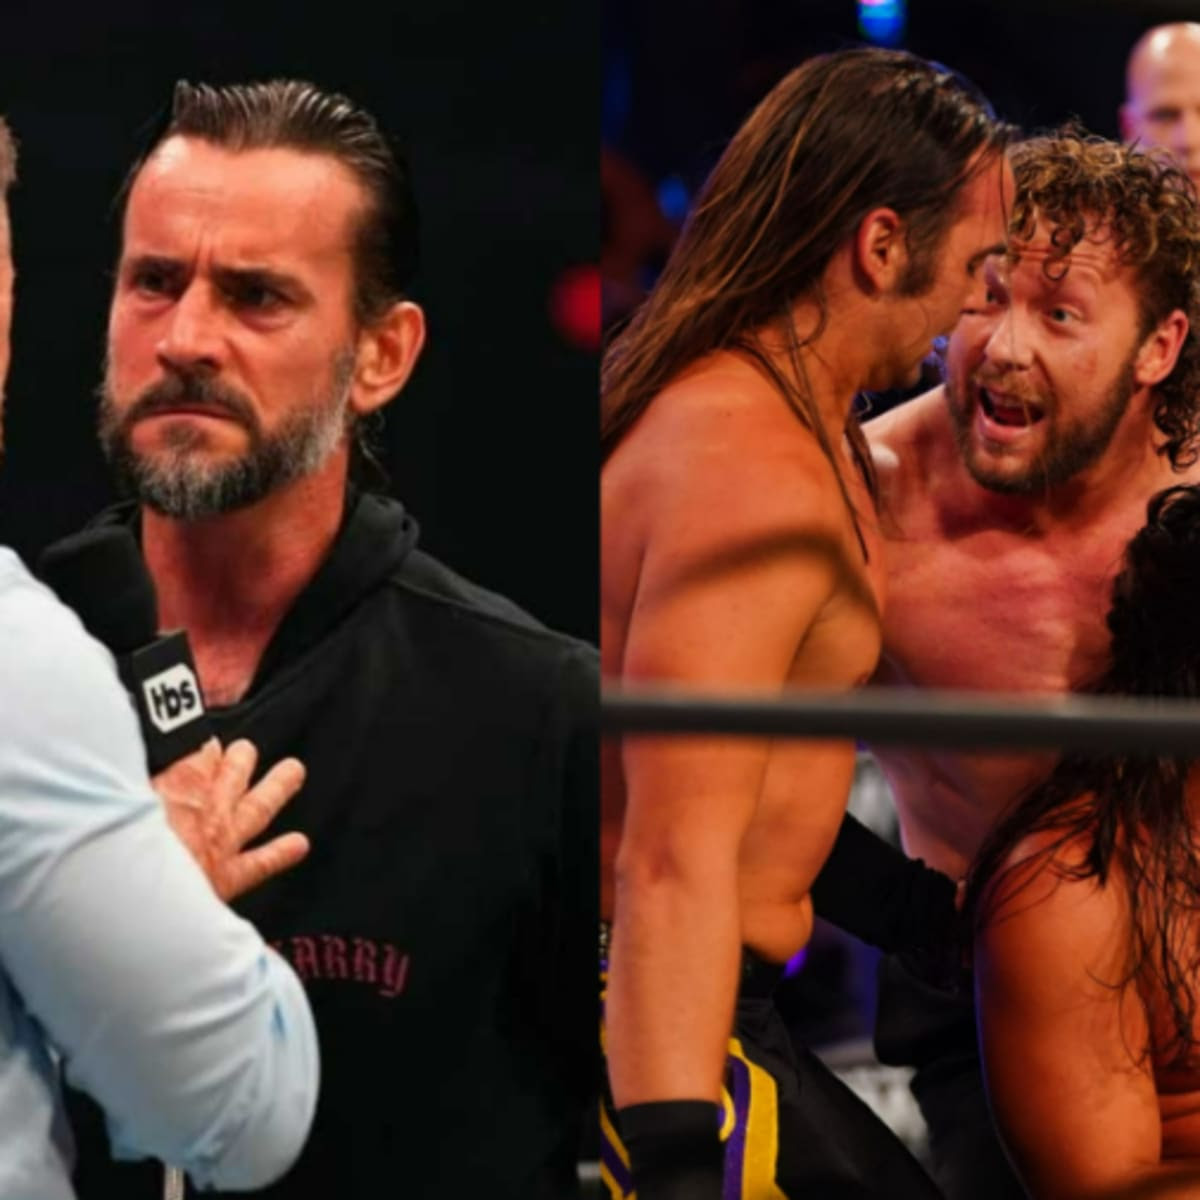 CM Punk's side reportedly backed off claim that Young Bucks kicked down locker room door, Bucks and Kenny Omega have yet to hear from AEW